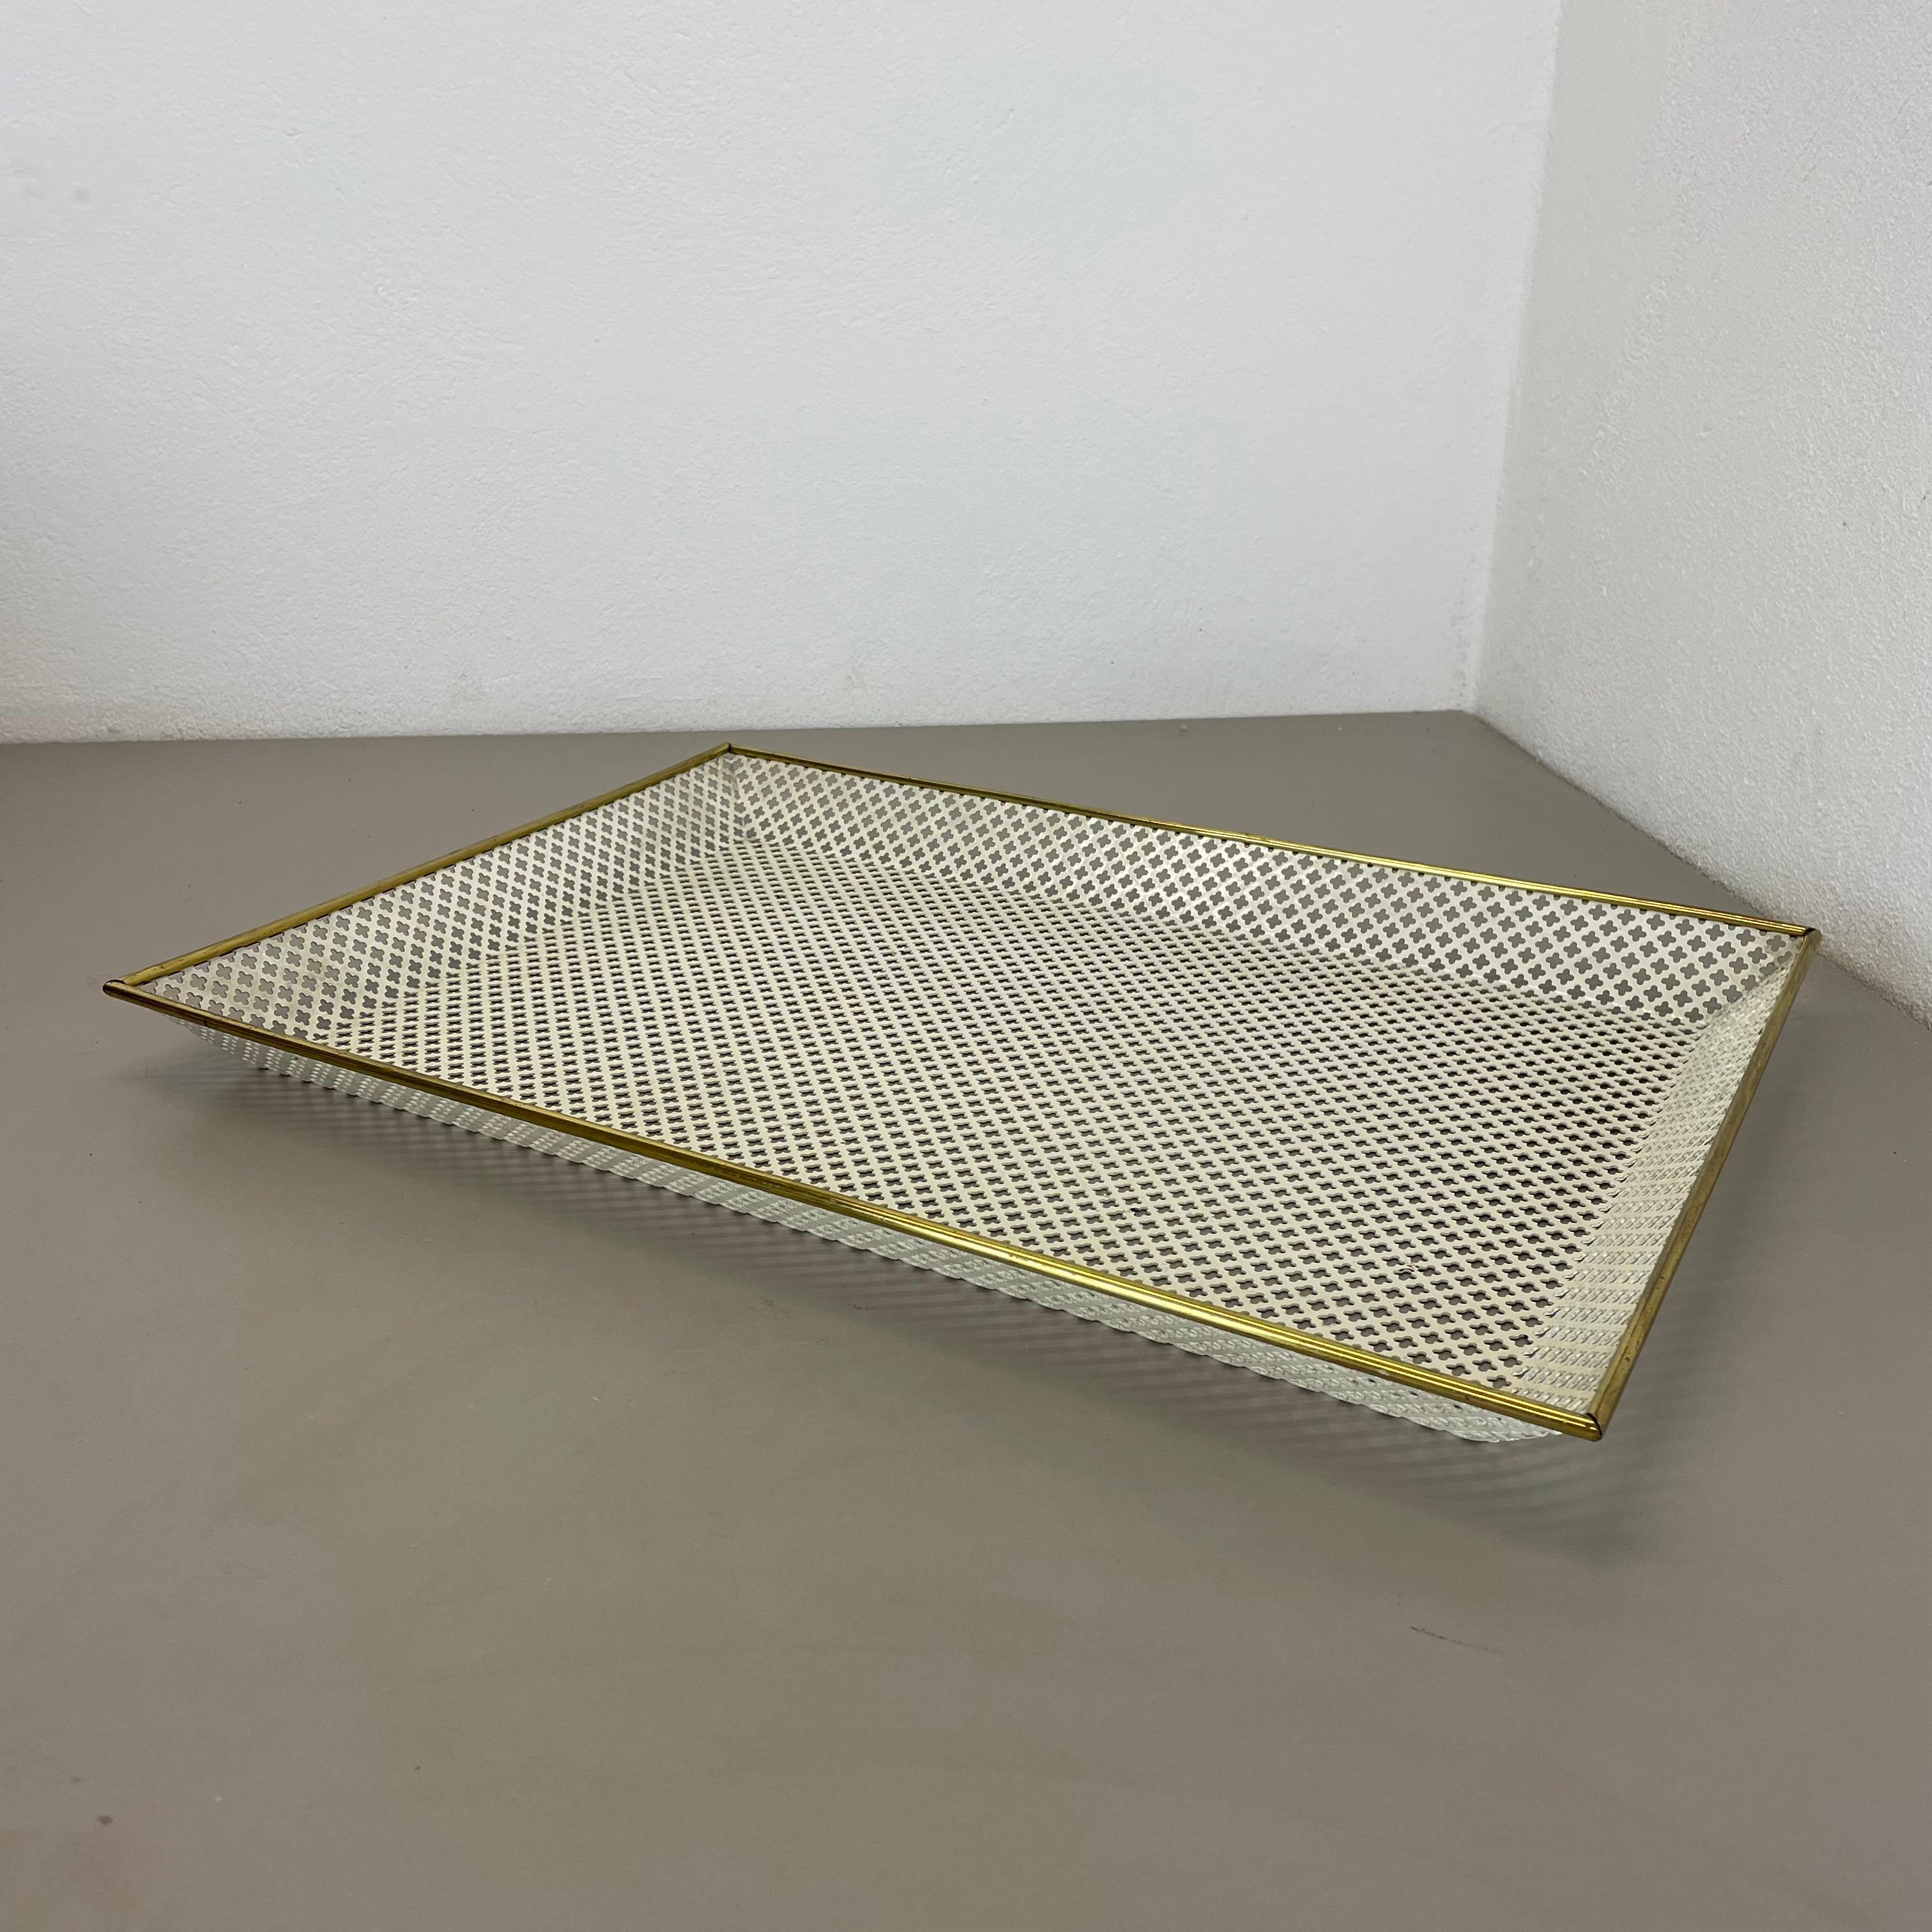 Article:

Tray element with hole pattern


Designer and Producer:

Mathieu Mategot




Origin:

France


Material:

metal and brass


Decade:

1950s


Description:

This original midcentury tray element was designed and produced in the 1950s in